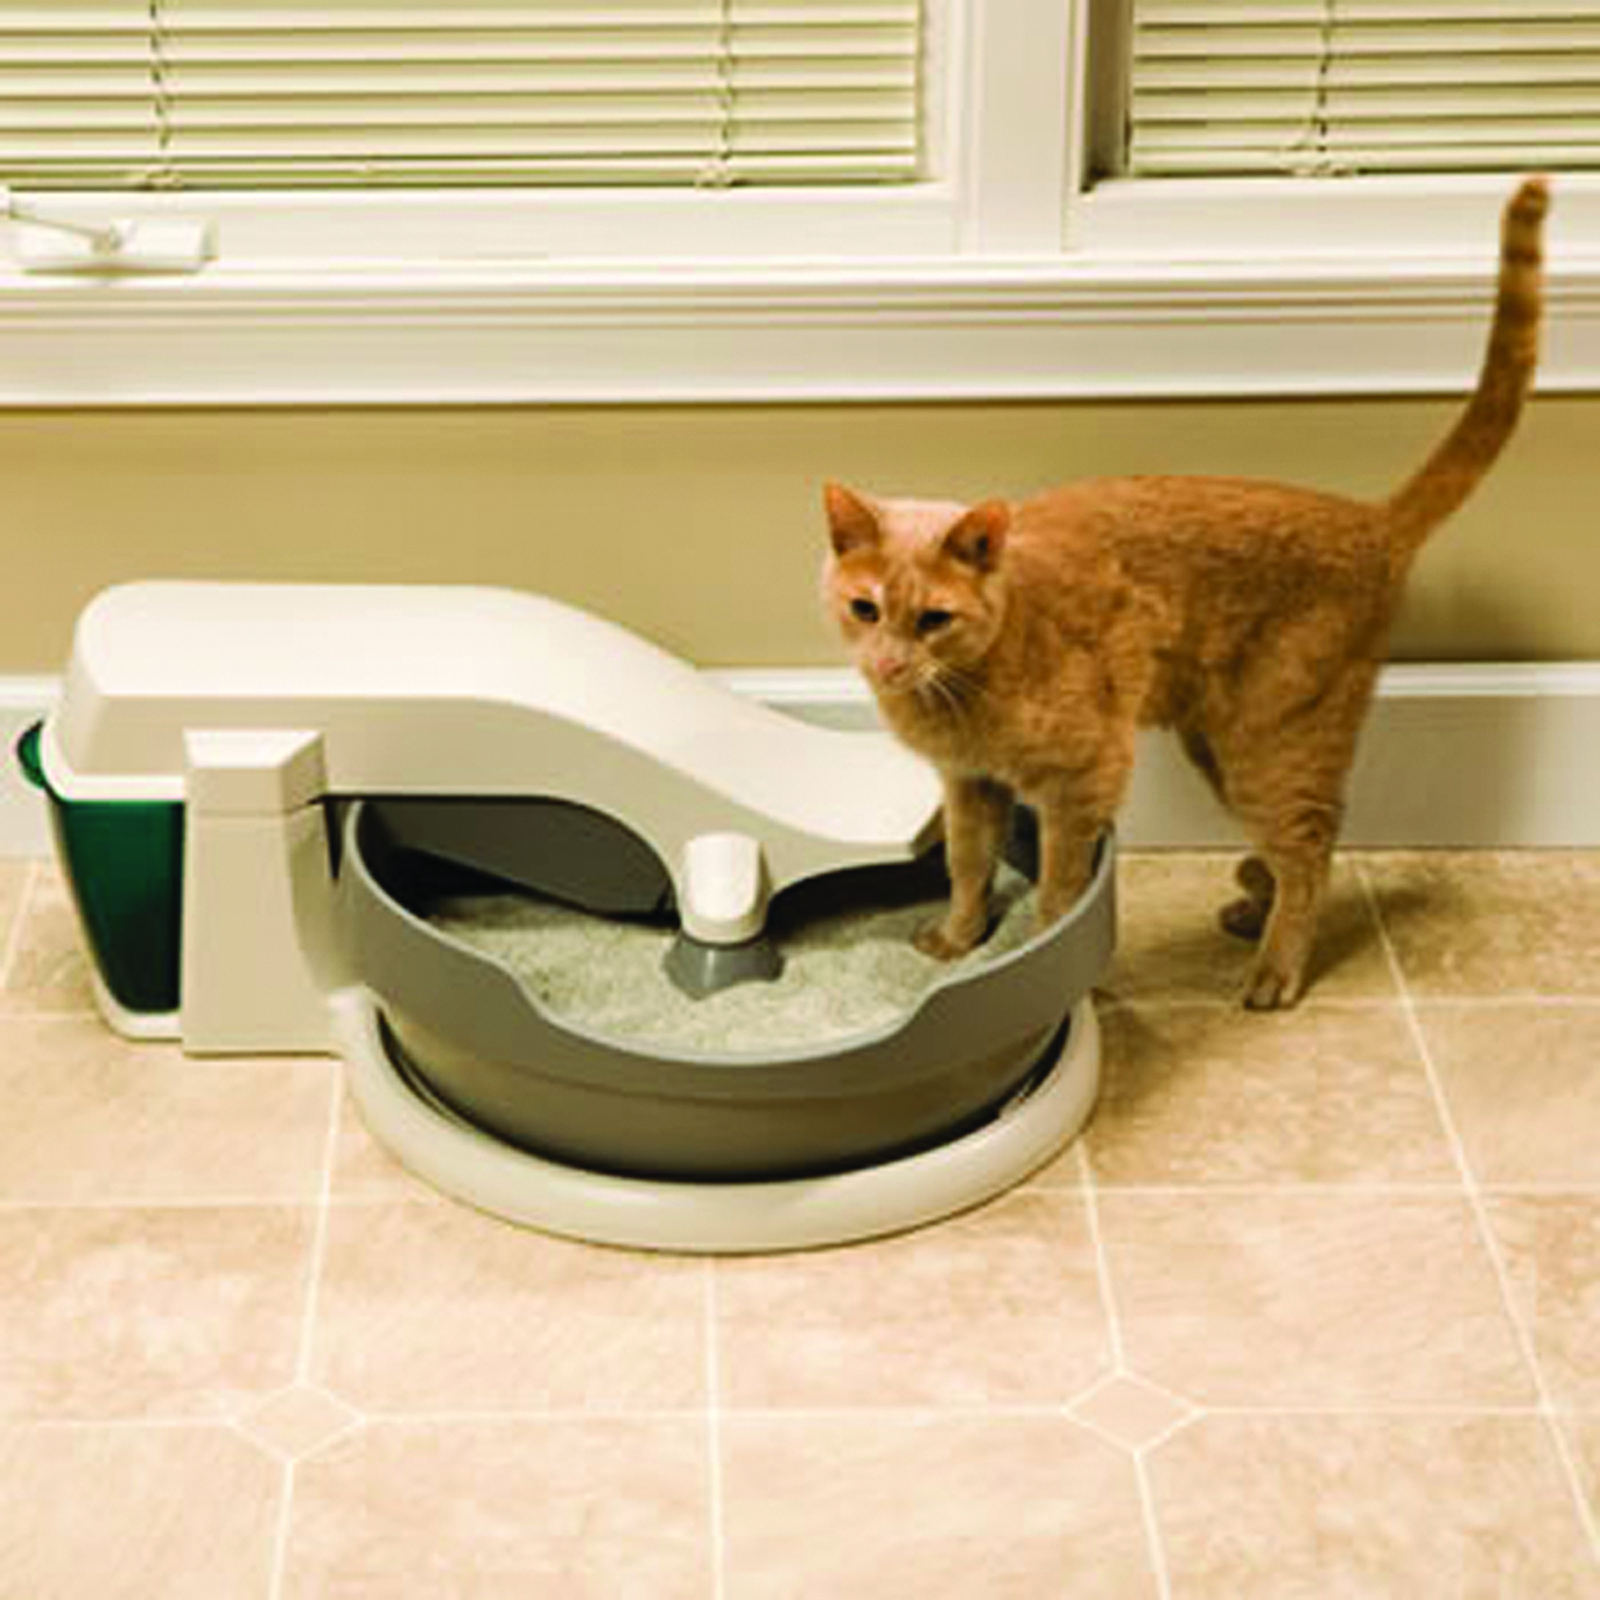 PETSAFE SIMPLY CLEAN AUTOMATIC LITTER BOX SYSTEM